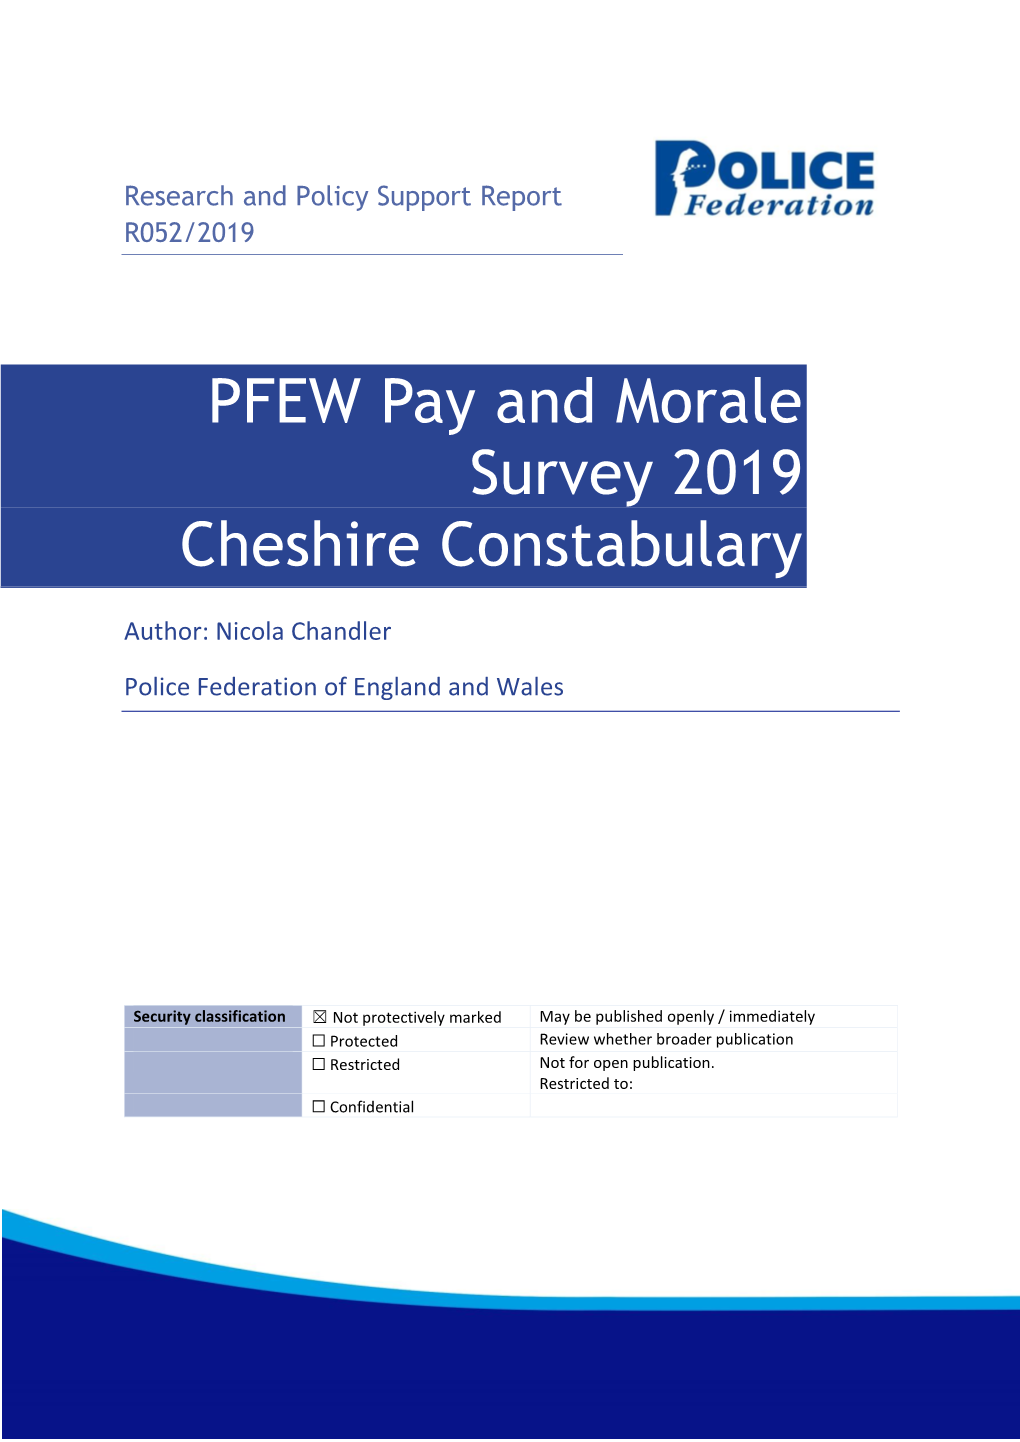 PFEW Pay and Morale Survey 2019 Cheshire Constabulary